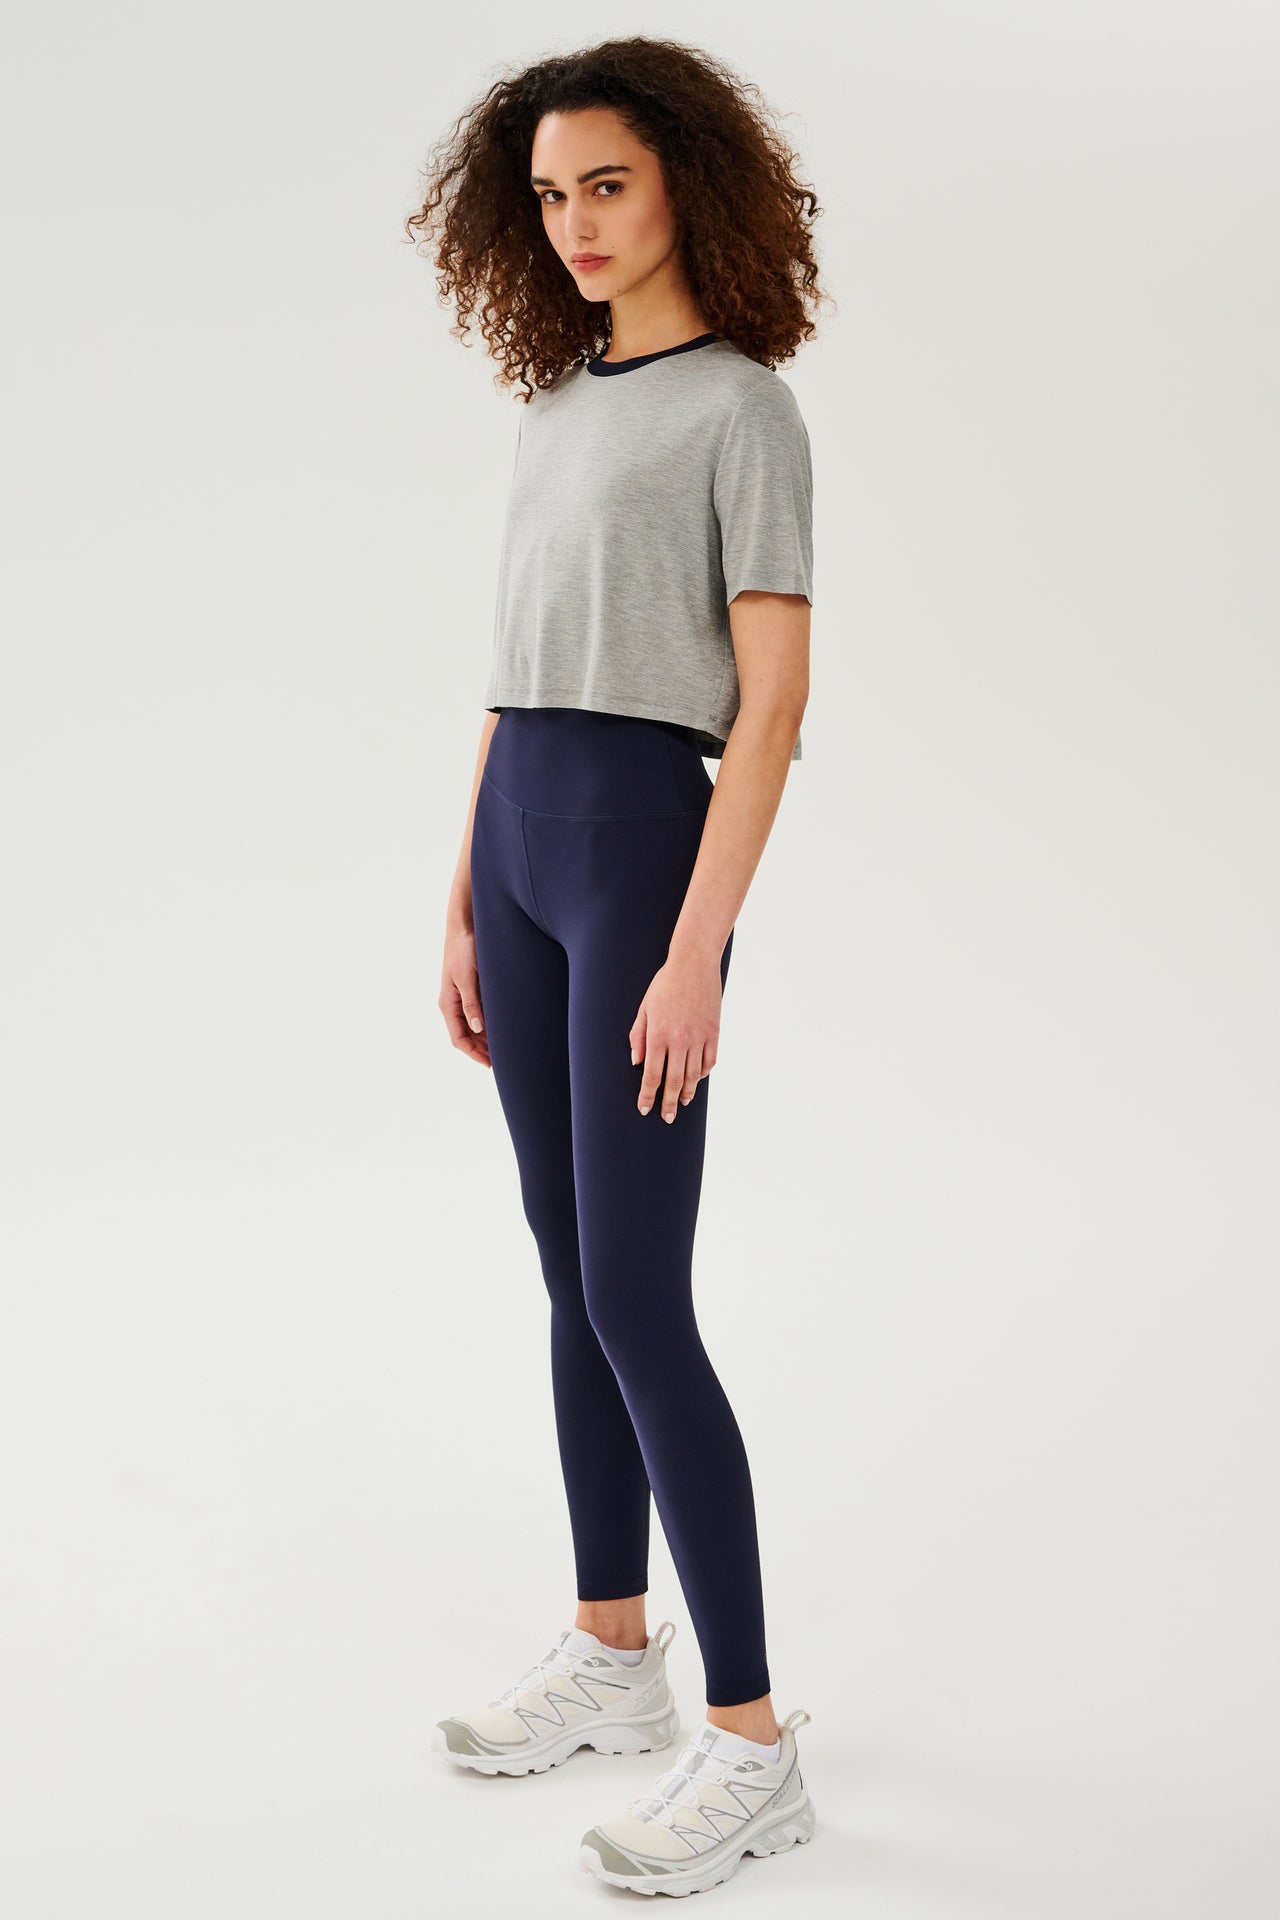 Full side view of girl wearing  light grey cropped short sleeve t-shirt with thin dark blue neck hem and dark blue leggings with white shoes